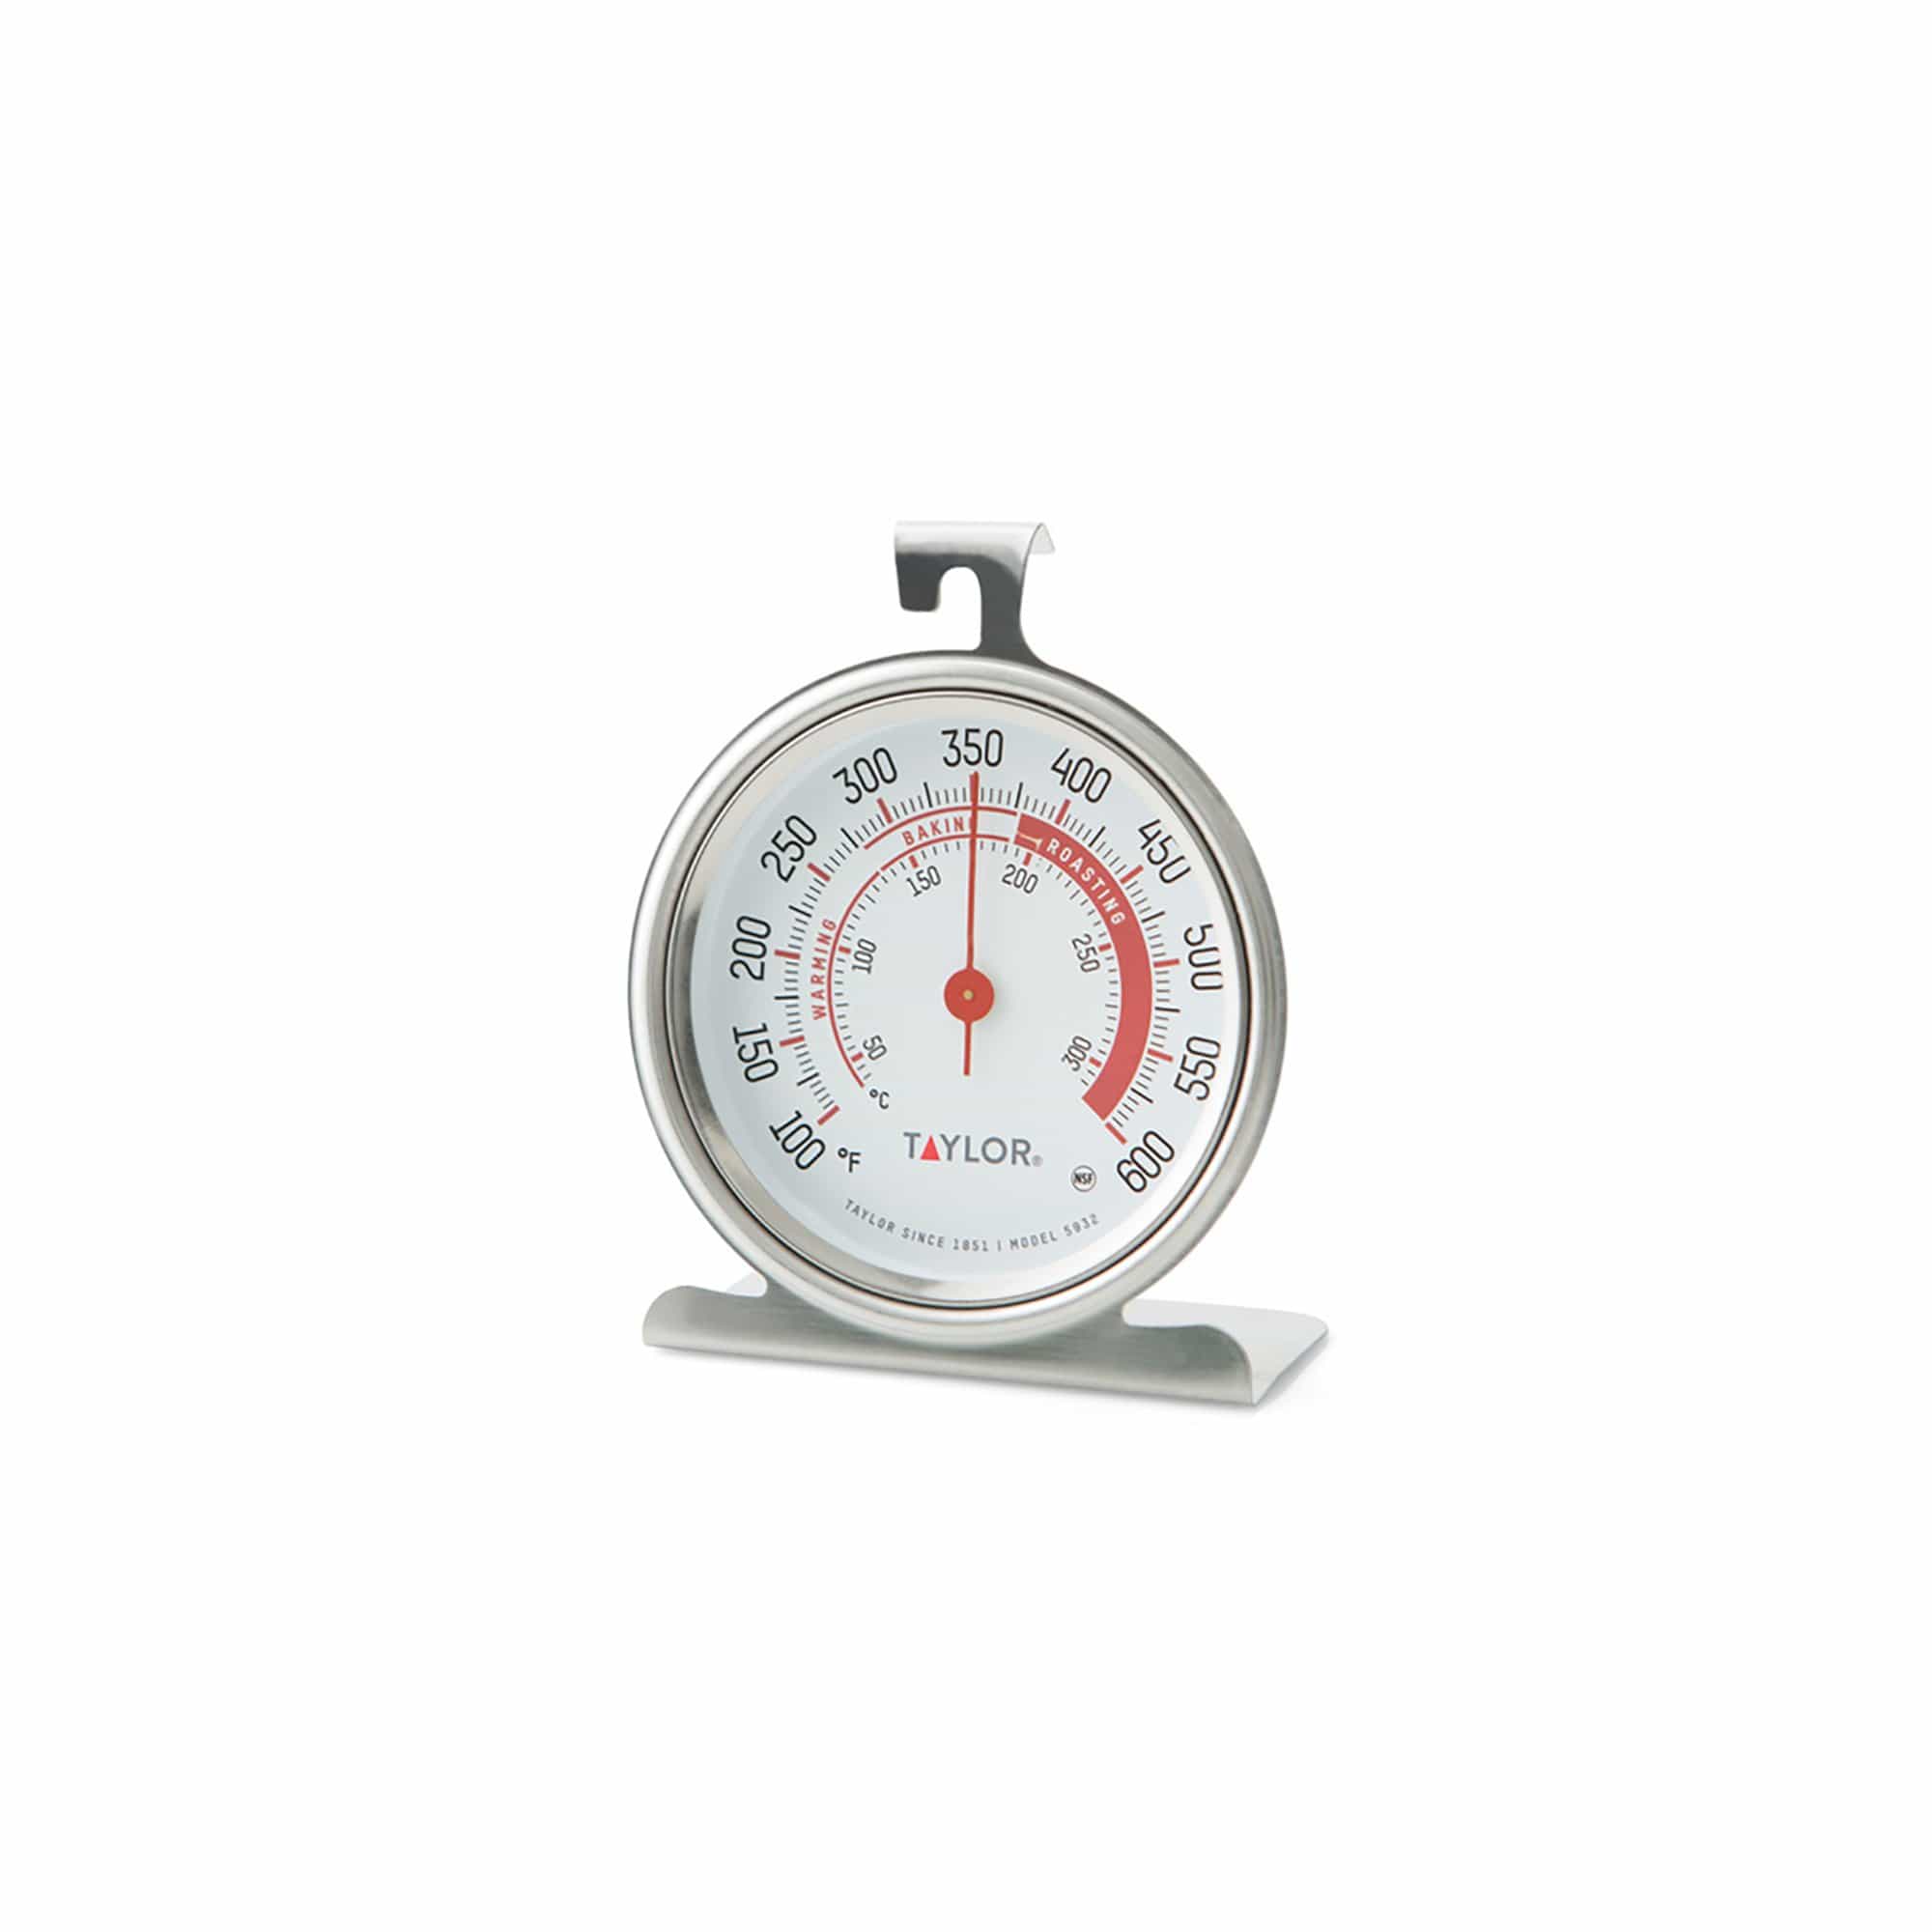 HUBERT® Stainless Steel Oven Dial Thermometer - 2 Dia Dial